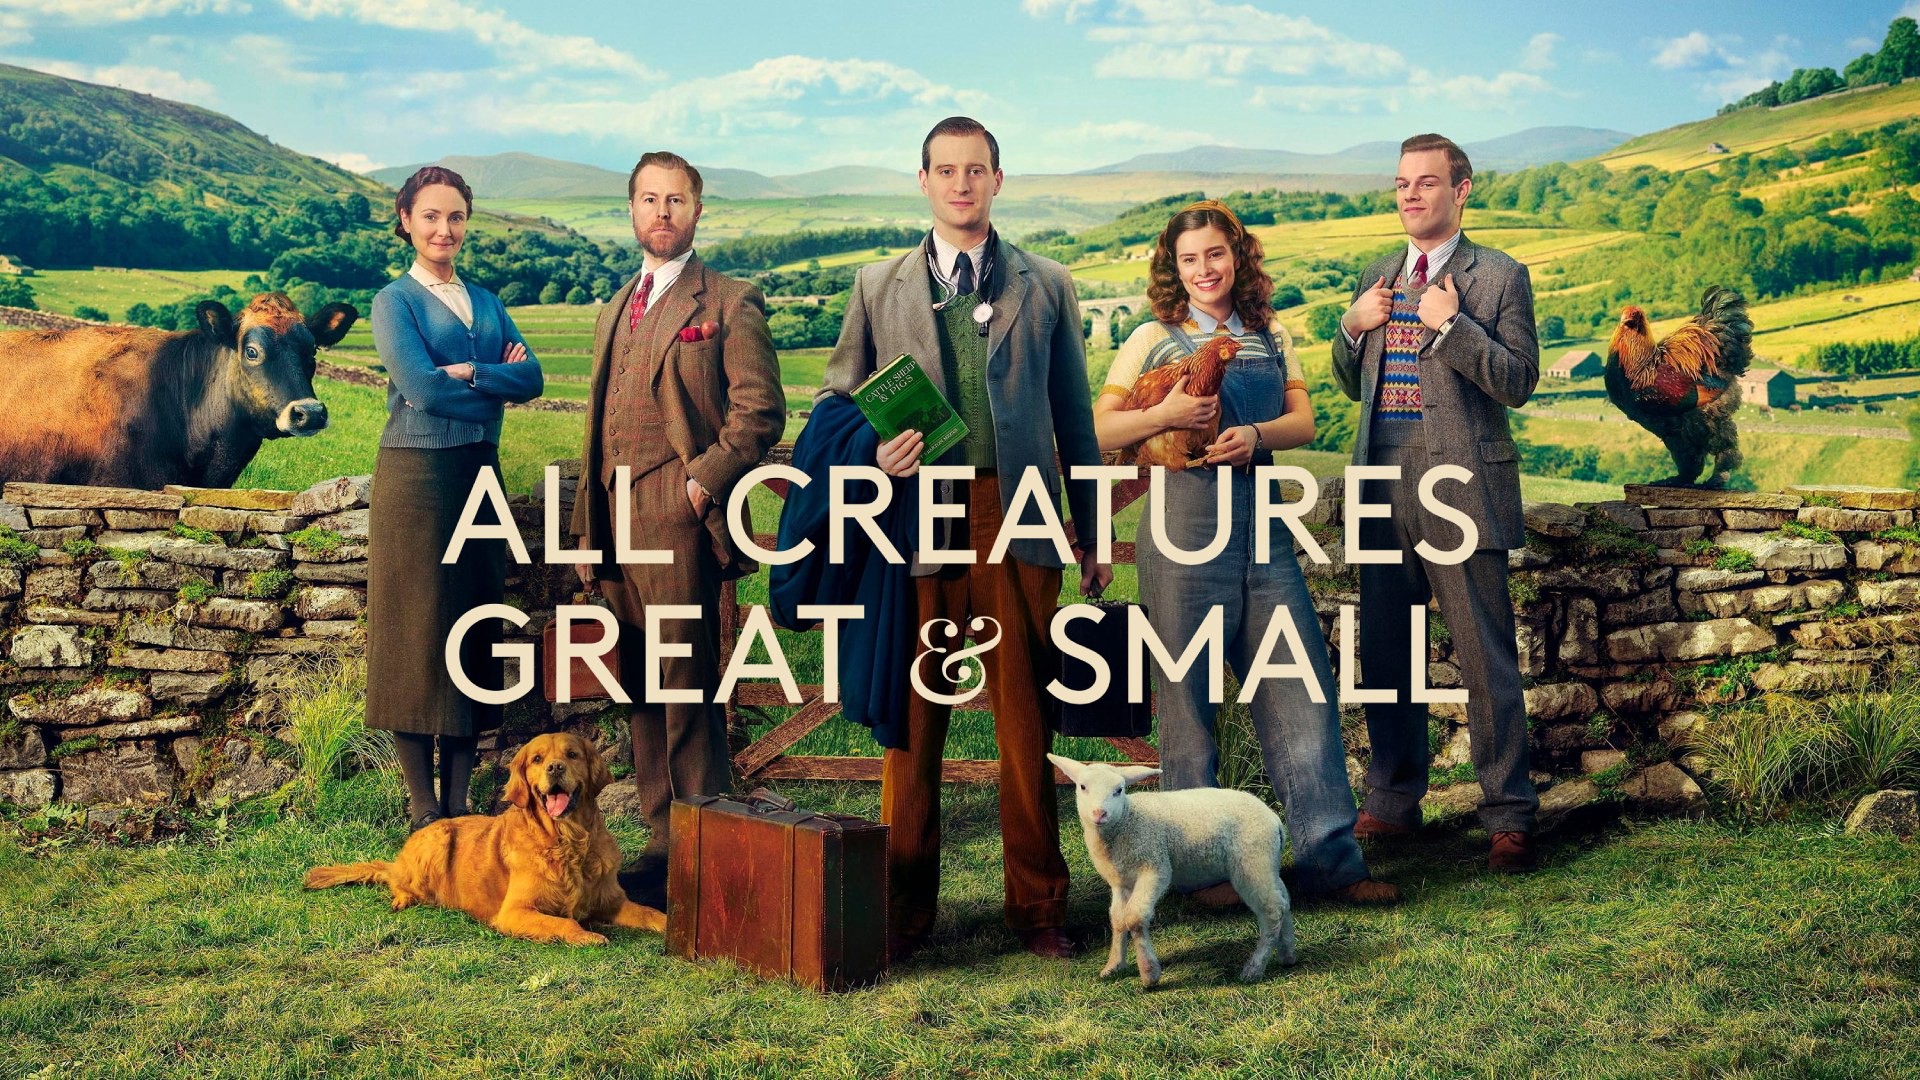 All Creatures Great And Small Overview Synopsis And Cast DroidJournal